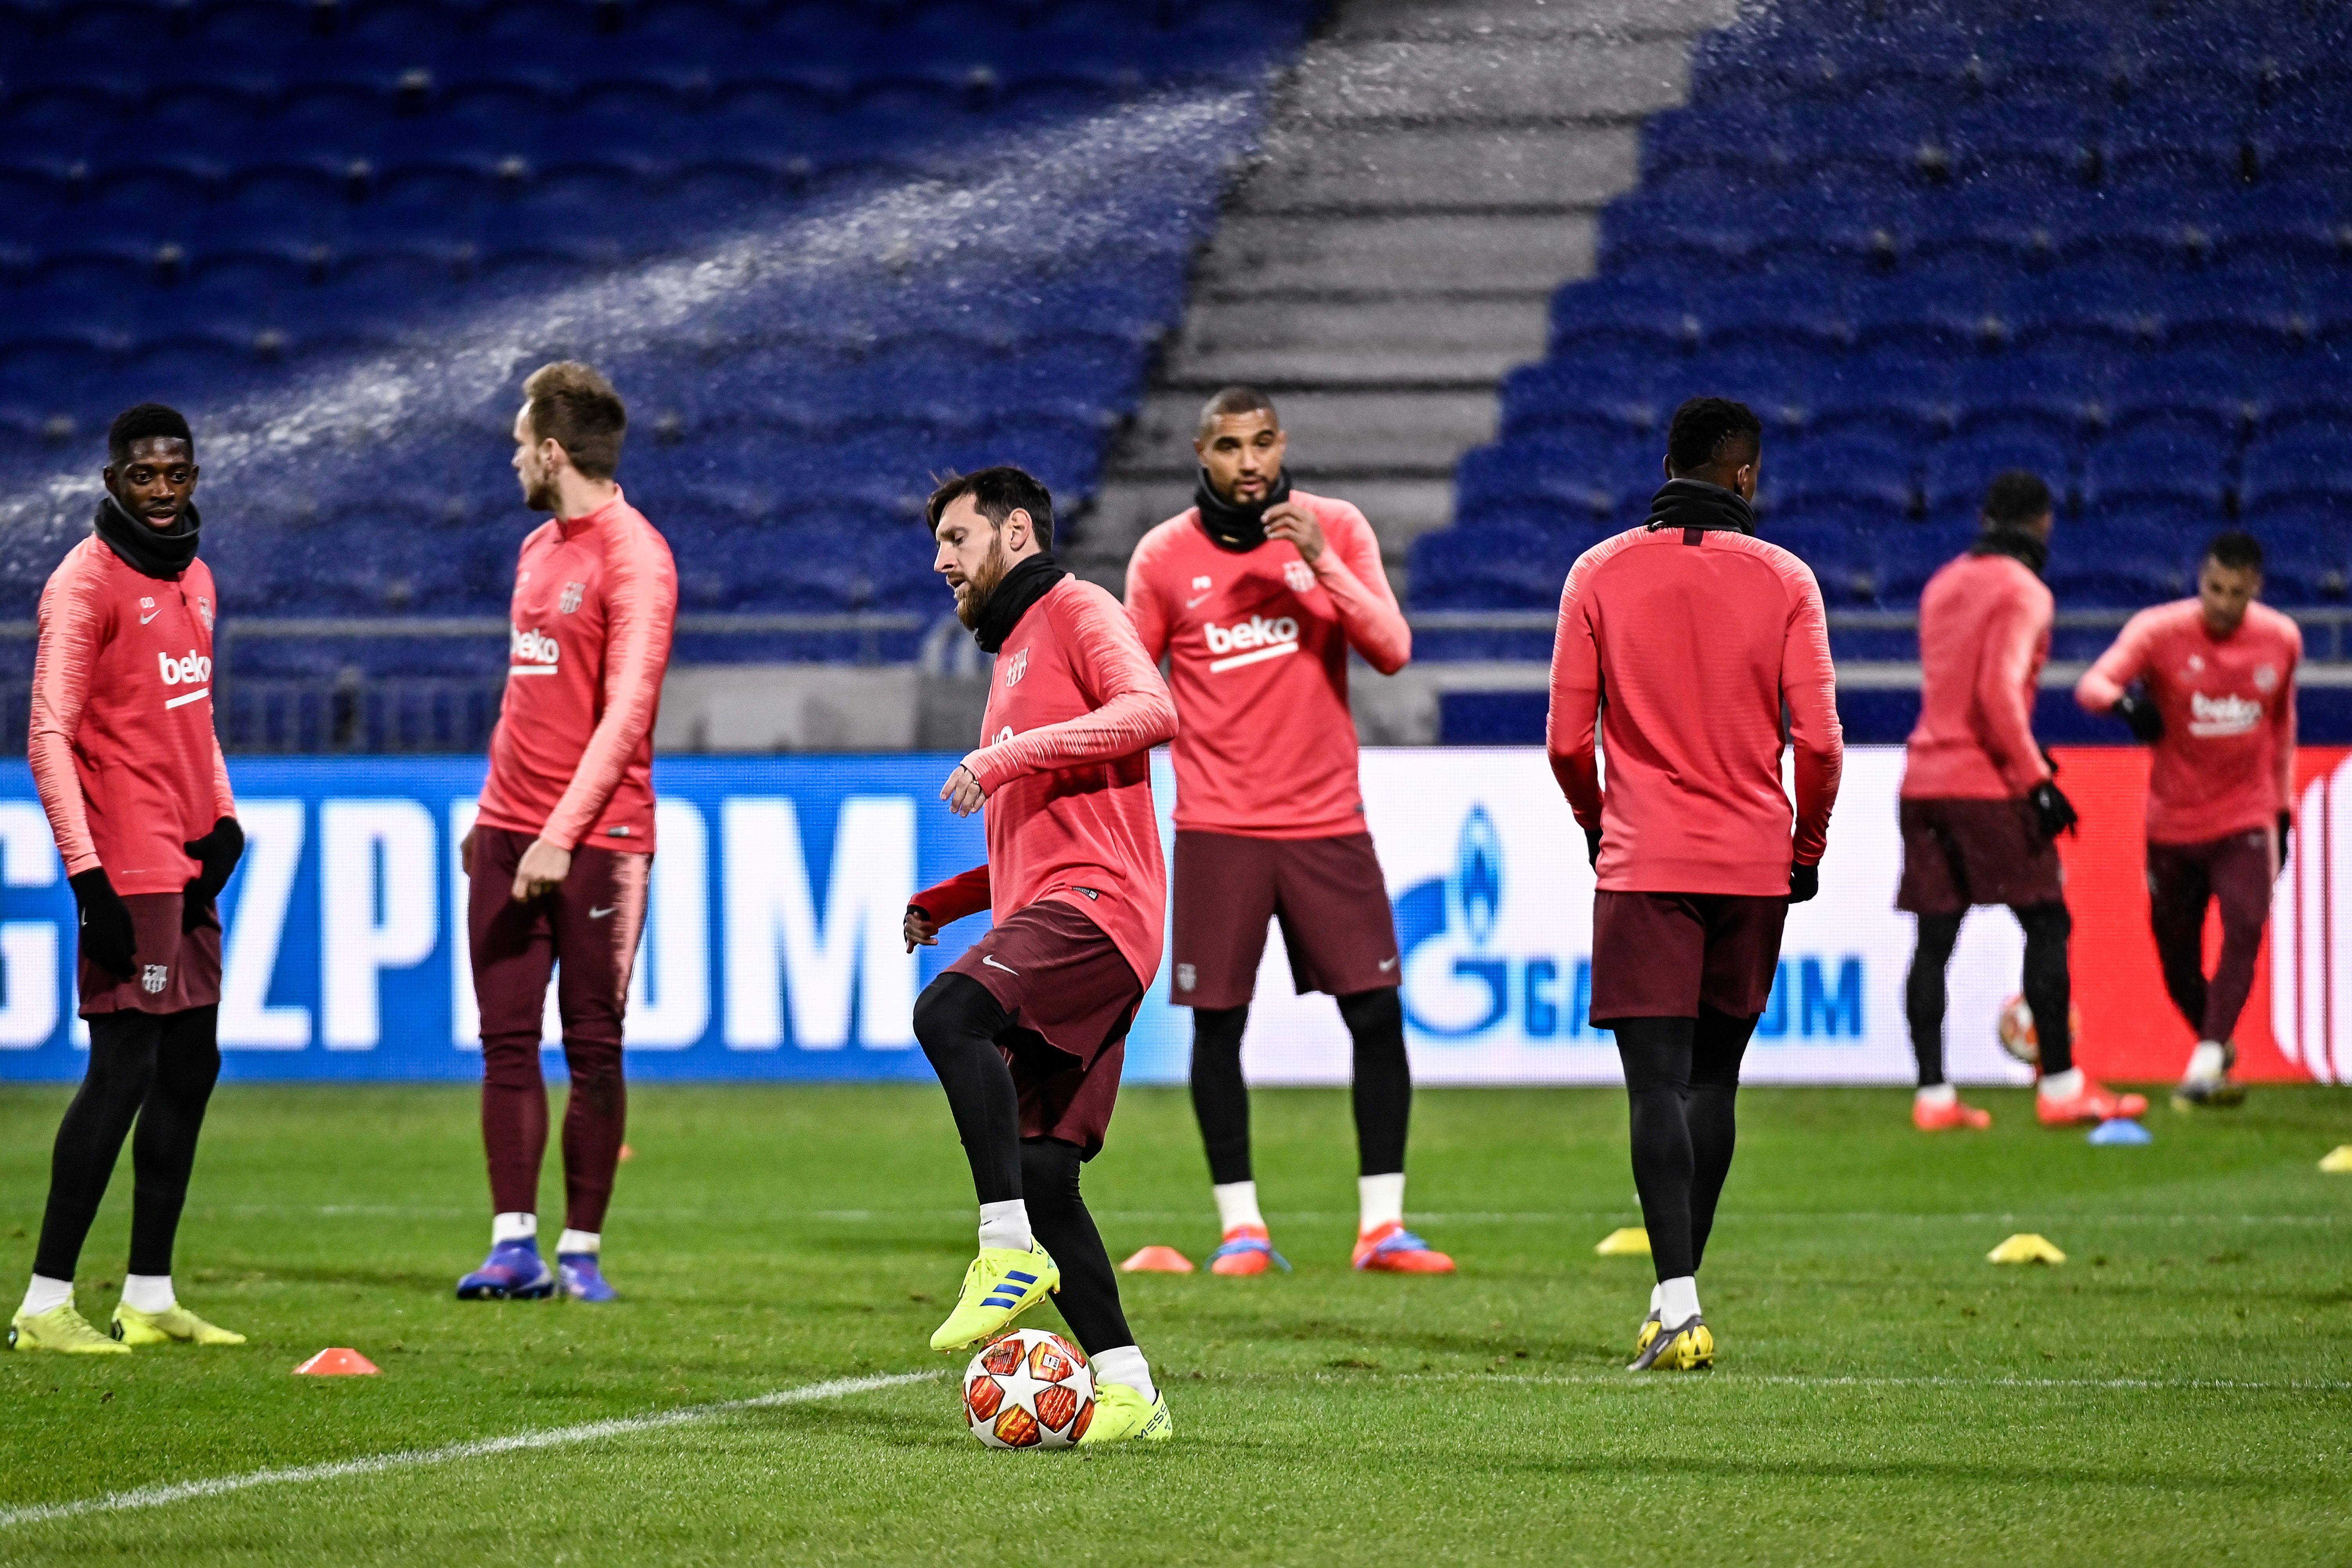 Barcelona's Argentinian forward Lionel Messi (C) and other Barcelona's players take part in a training session at the Parc Olympique Lyonnais stadium in Decines-Charpieu, on February 18, 2019, on the eve of the European Champions League football match between Lyon (OL) and FC Barcelona. (Photo by JEFF PACHOUD / AFP)        (Photo credit should read JEFF PACHOUD/AFP/Getty Images)